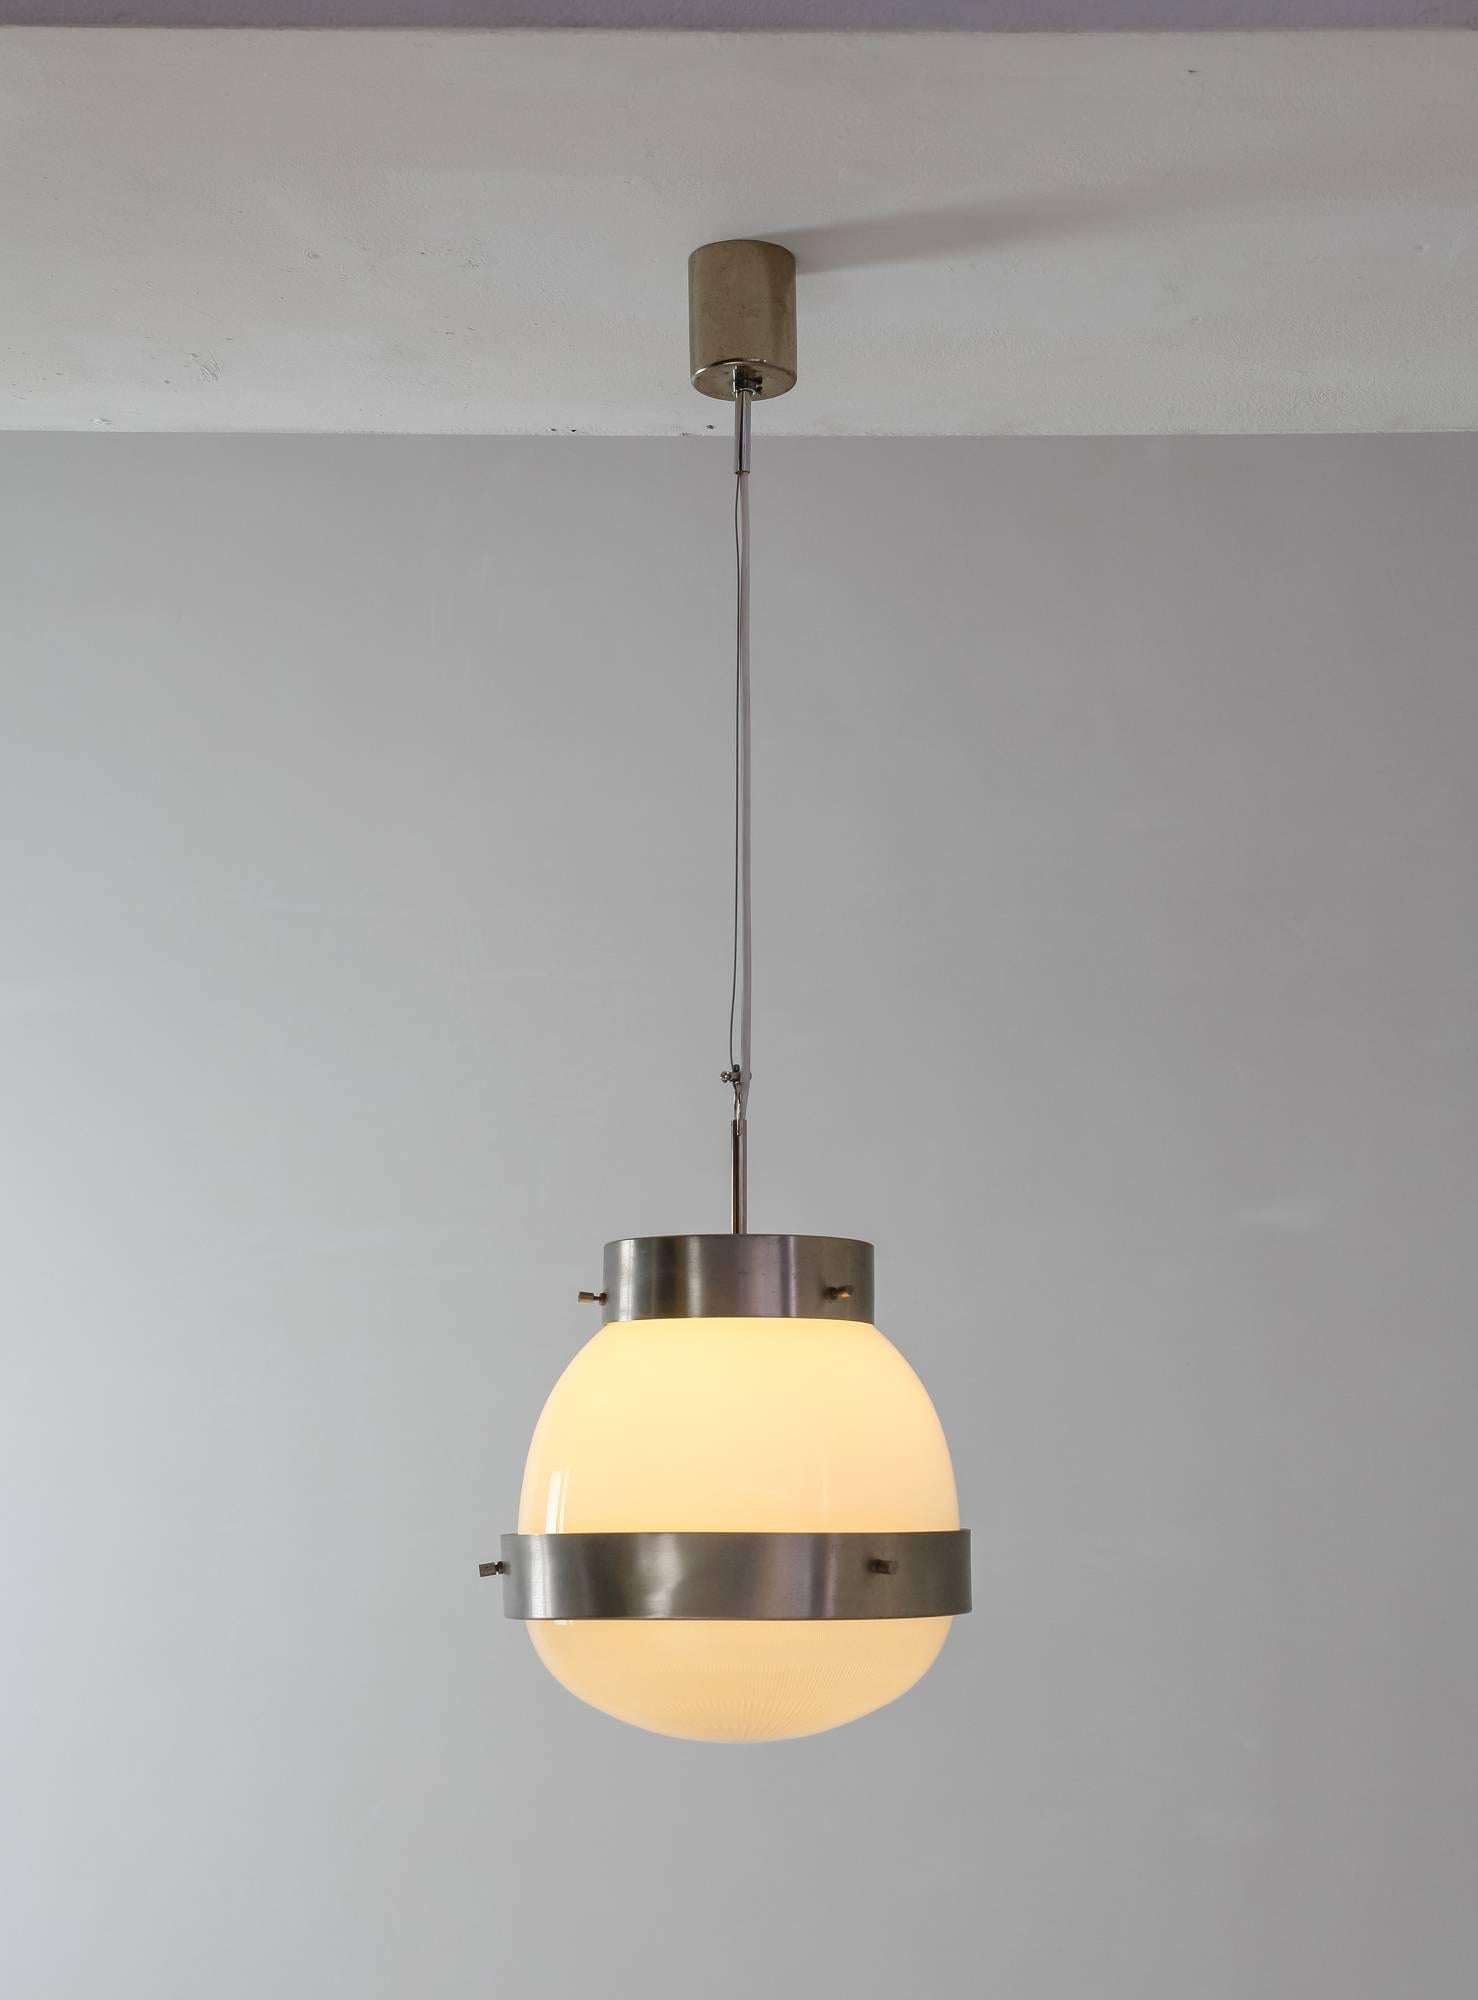 A height-adjustable 'Delta' pendant designed by Sergio Mazza for Artemide, circa 1960.
The lamp is made of brushed, nickel-plated brass with a two-part glass diffuser. The upper part is made of opaline glass and the lower part of pressed crystal.